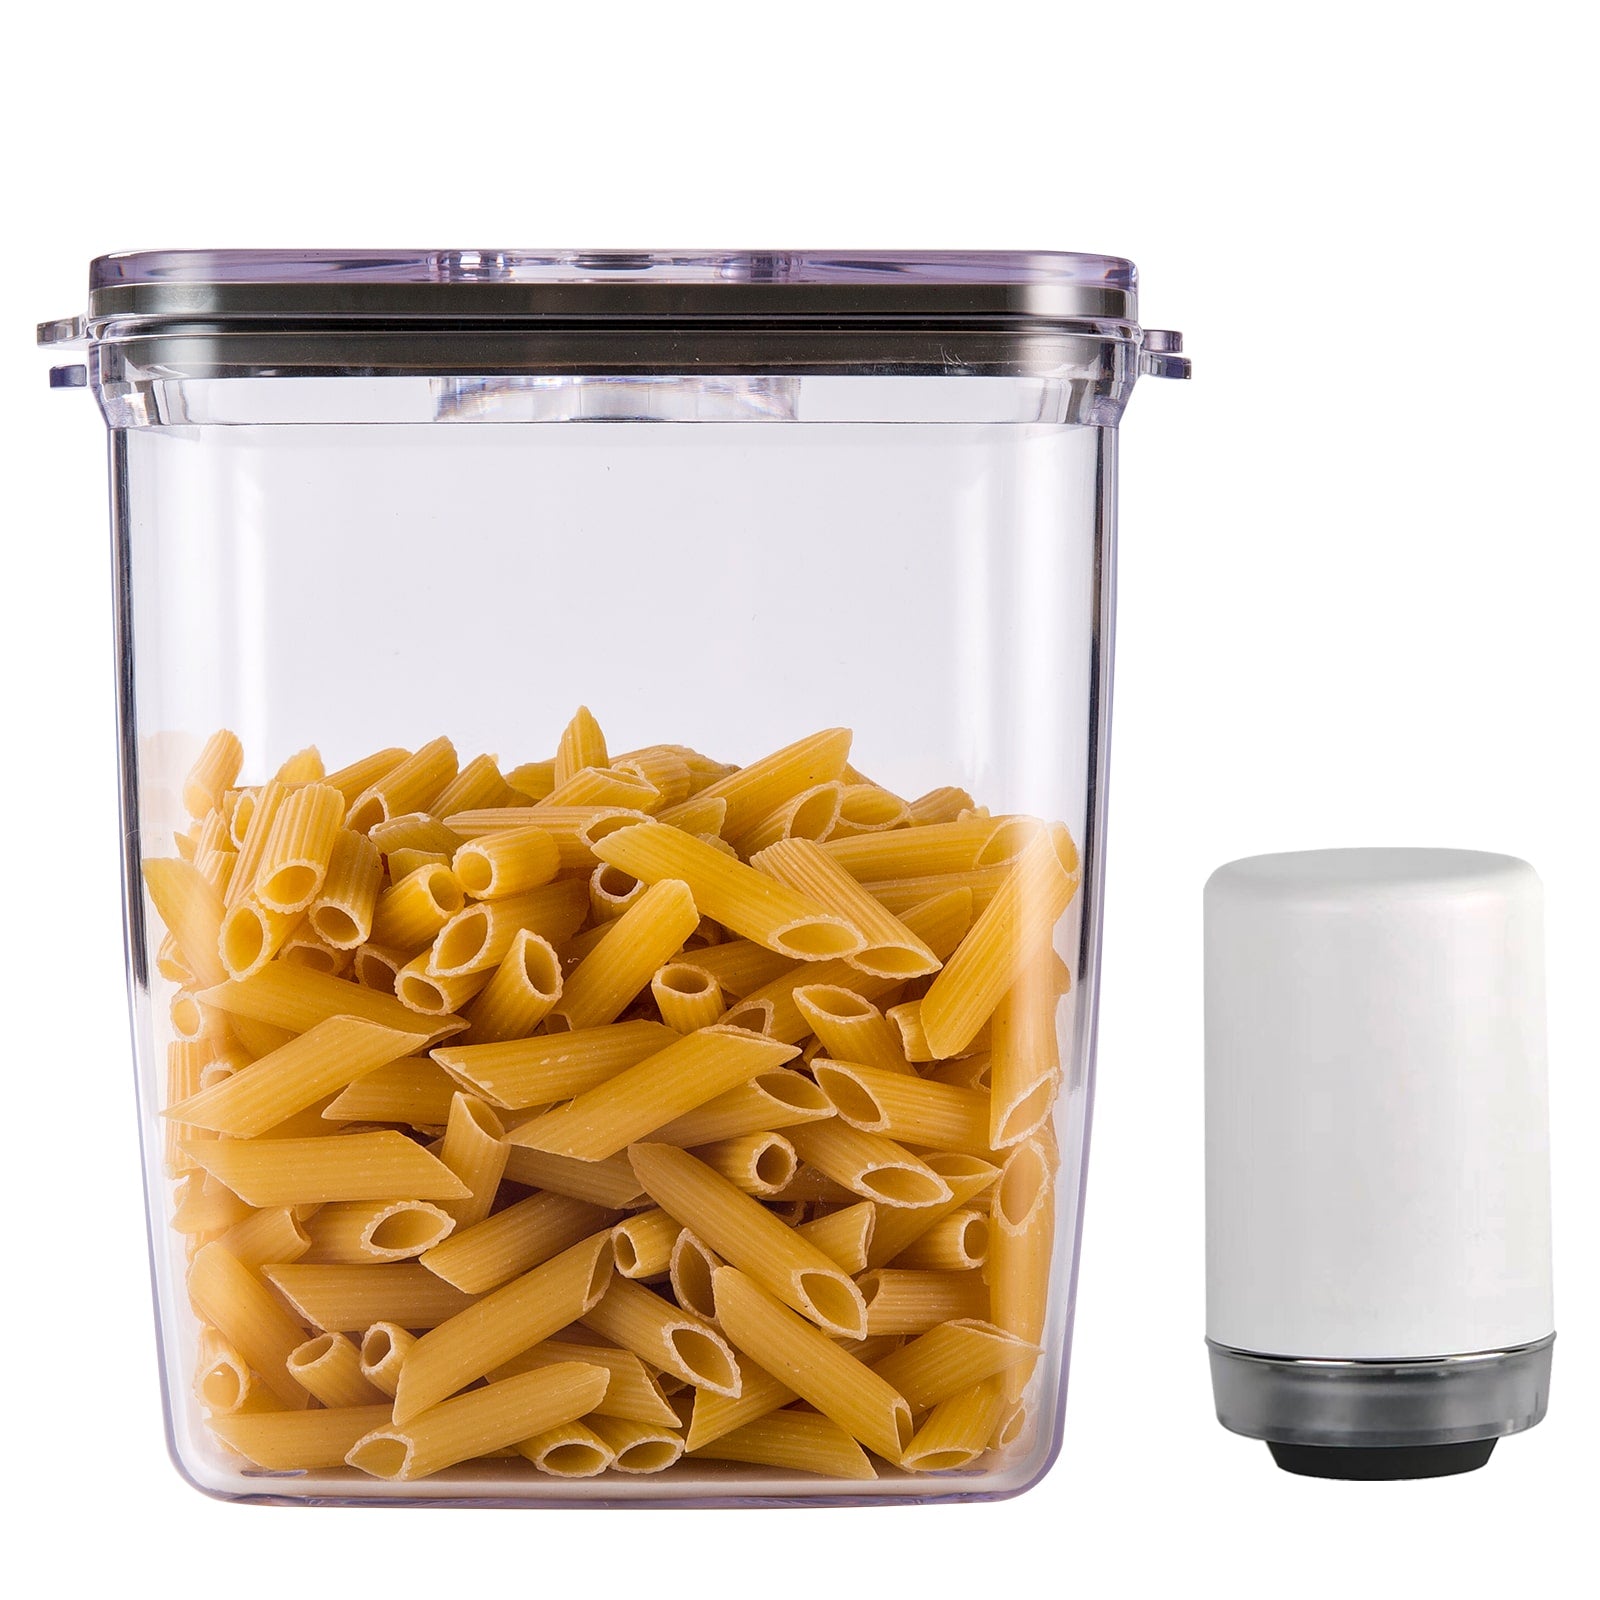 Airtight Food Containers